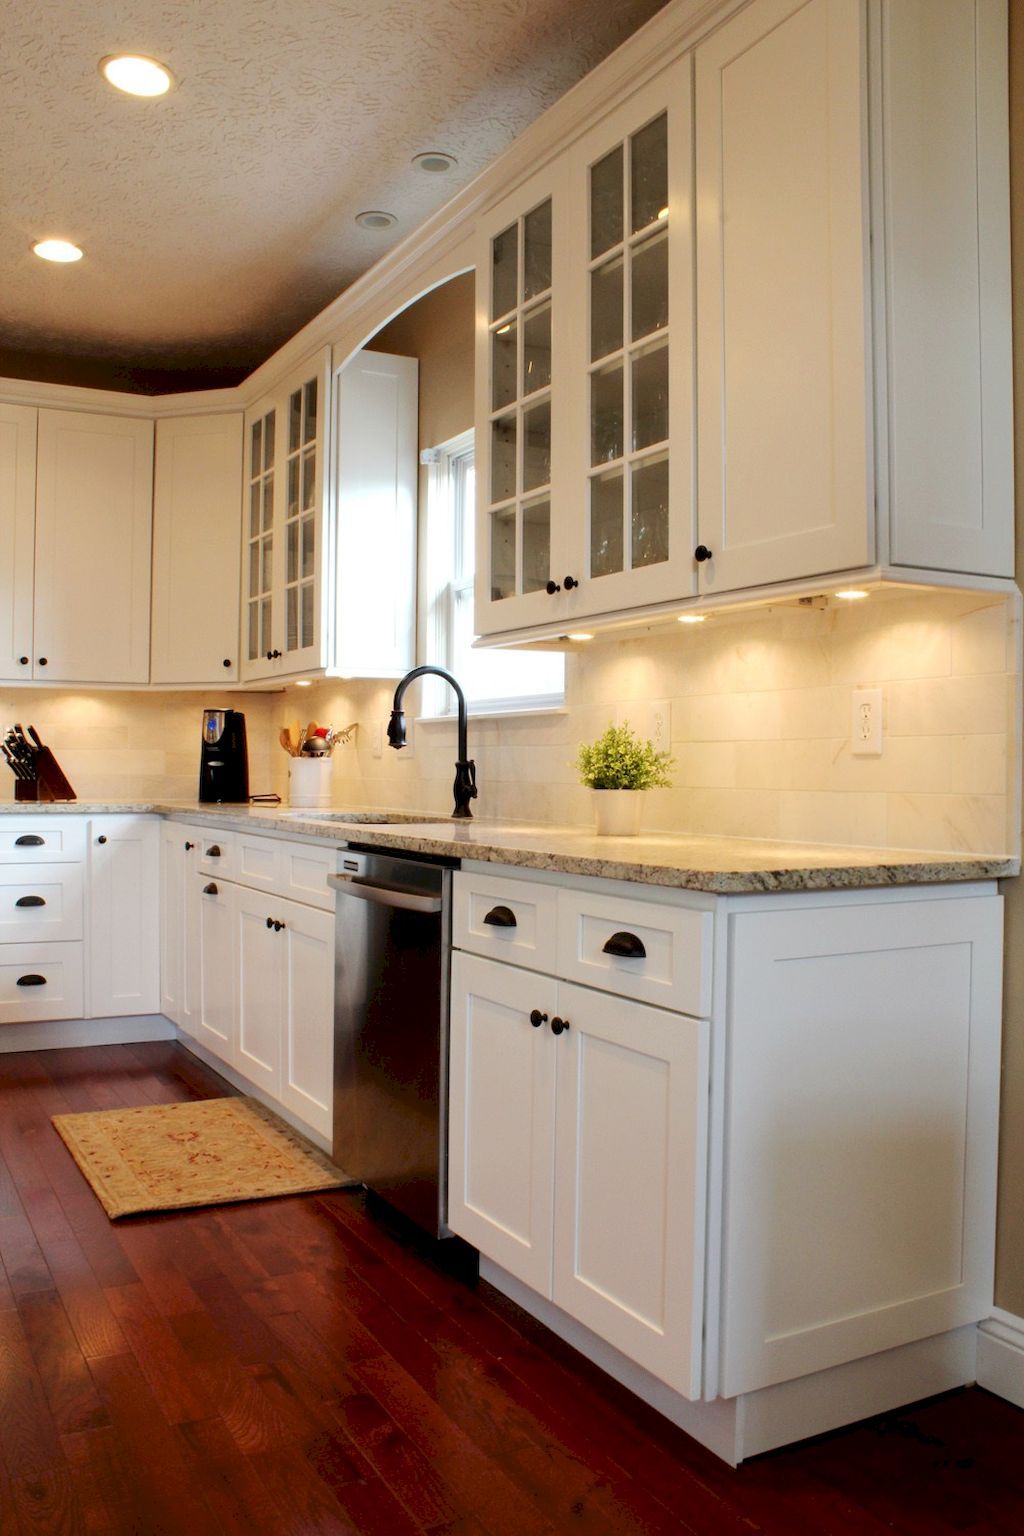 Tips On How To Improve The Outlook Of White Shaker Kitchen Cabinets